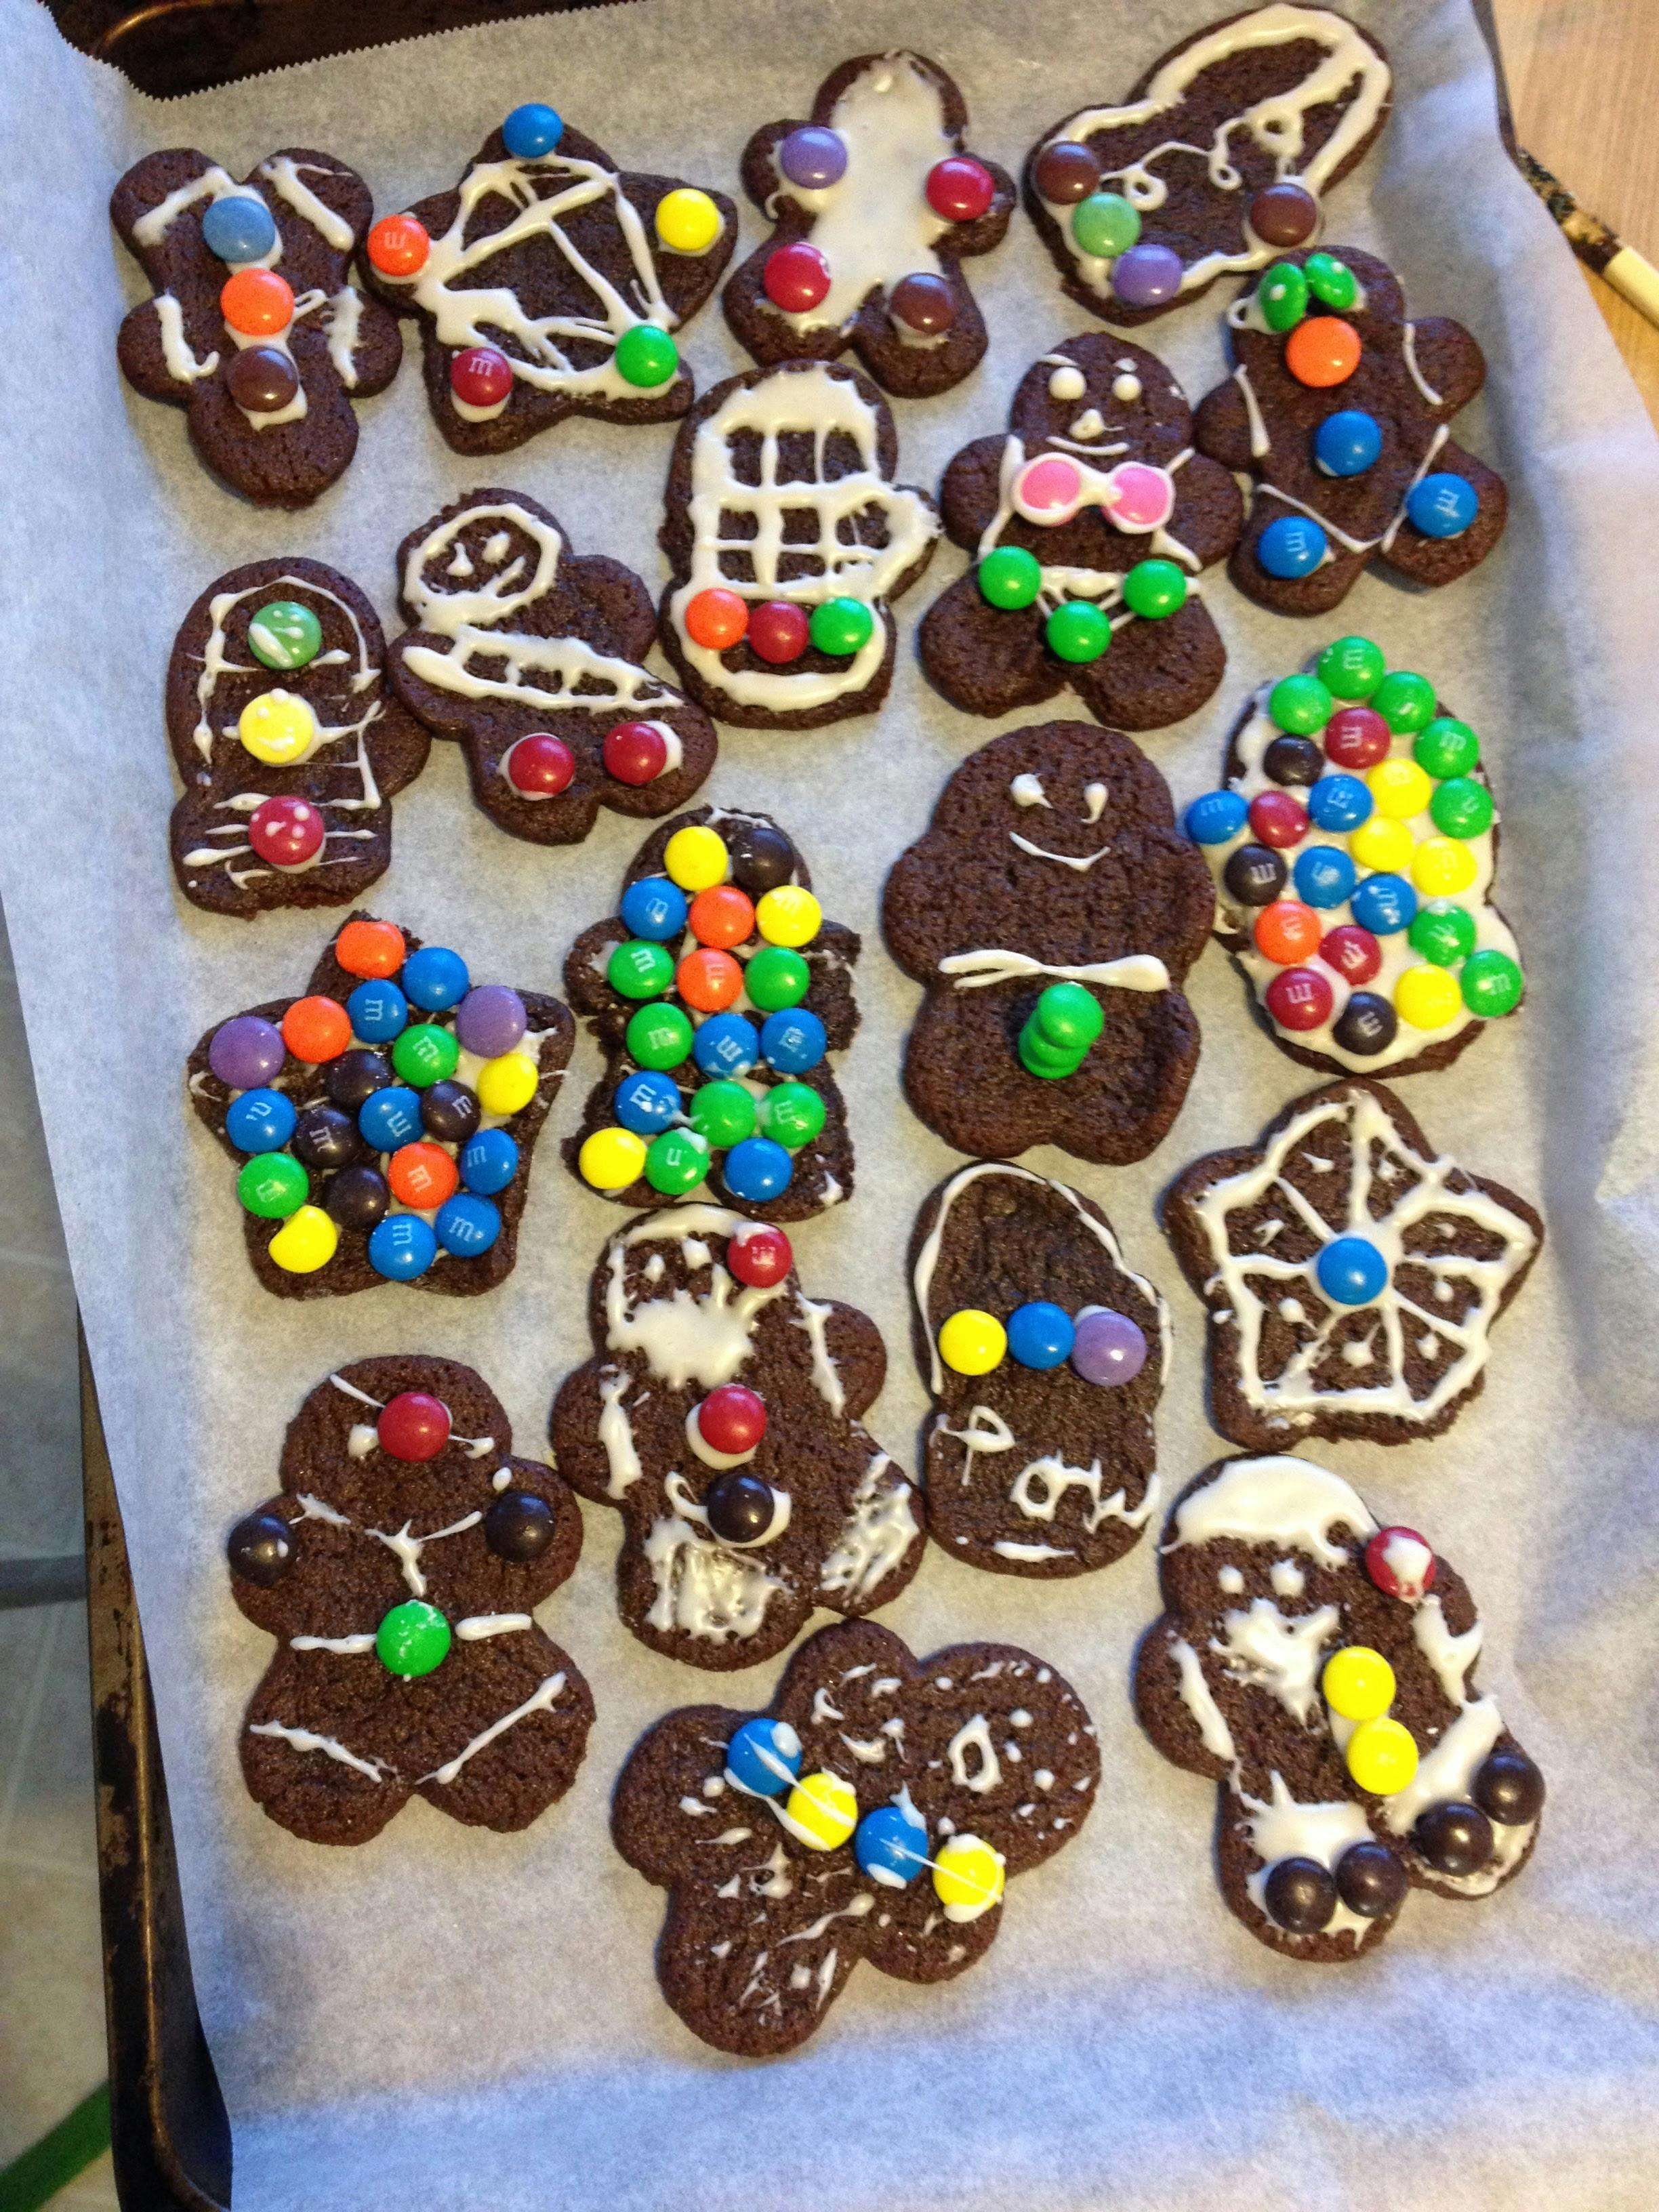 Decorated Gingerbread Cookies in different shapes with smarties.